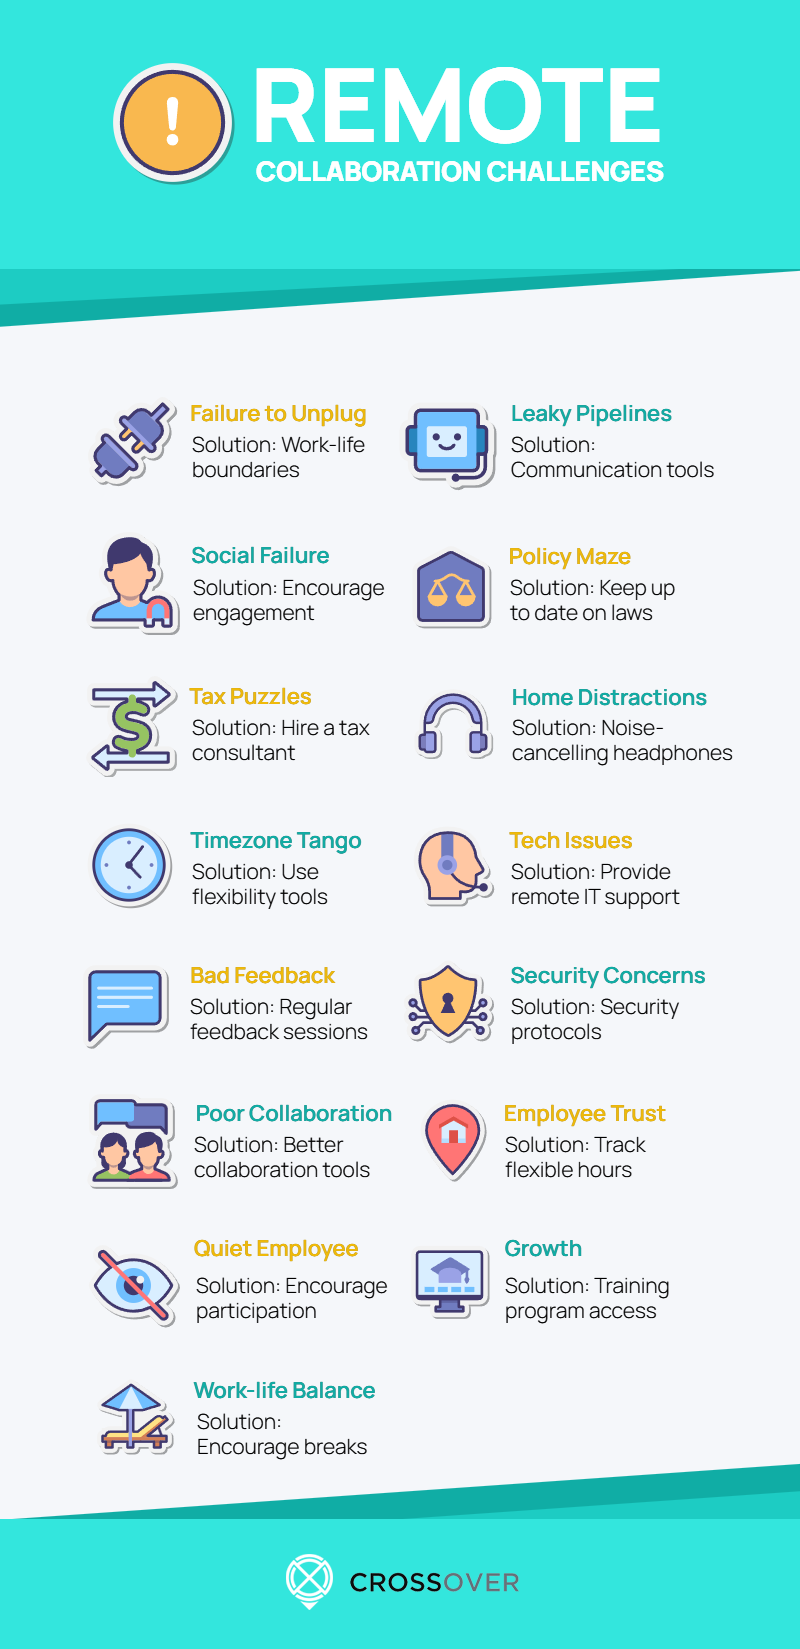 15 remote collaboration challenges infographic with solutions